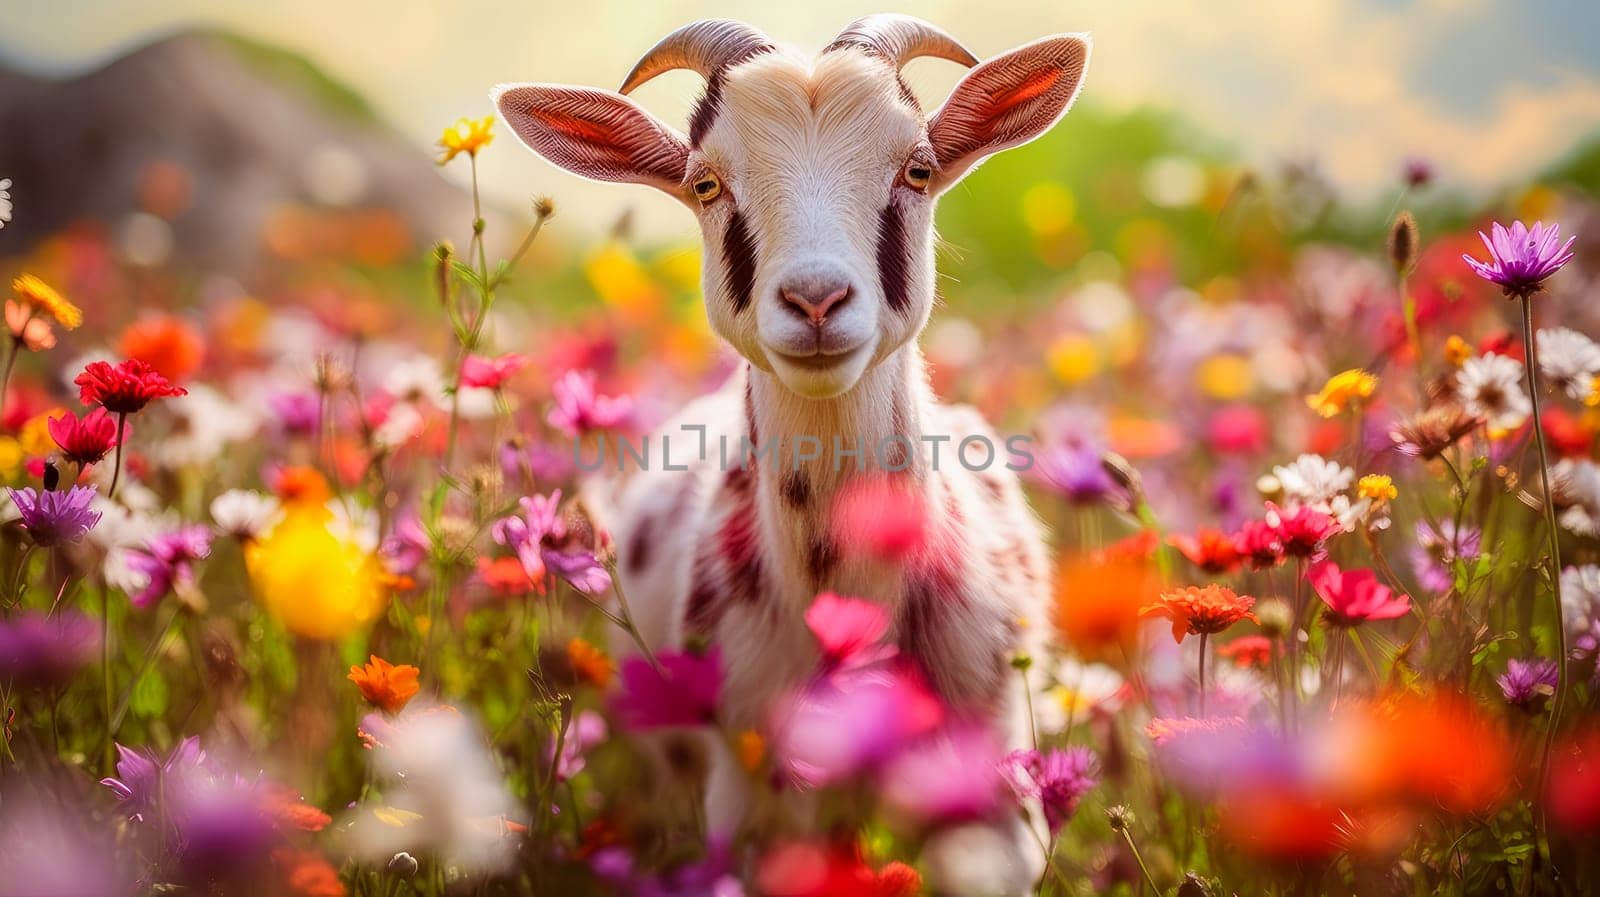 Cute goat in a field with flowers in nature, in the sun's rays. Environmental protection, the problem of ocean and nature pollution. by Alla_Yurtayeva